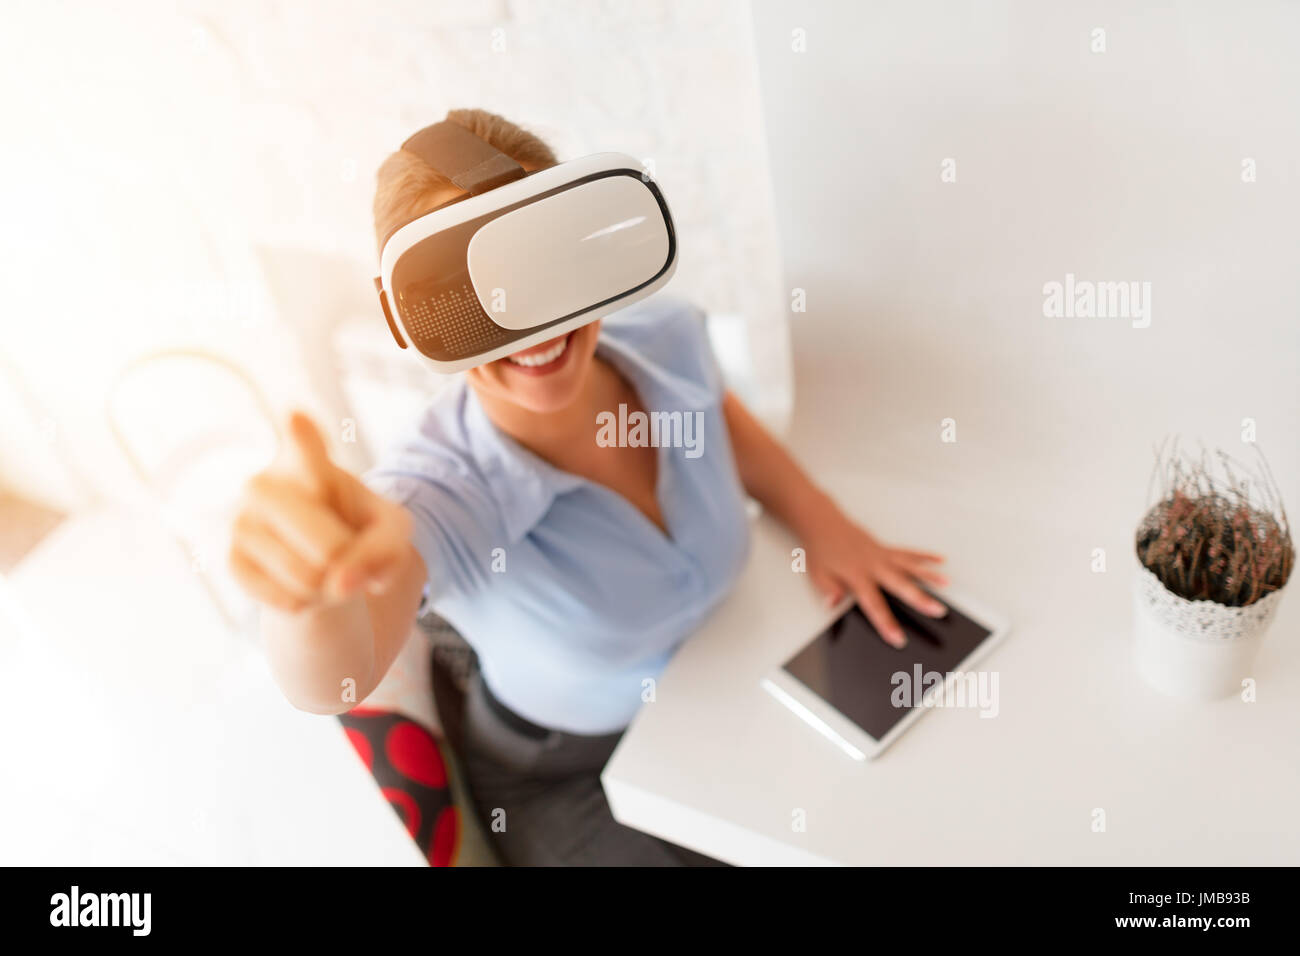 Happy businesswoman using virtual reality glasses in a cafe. Stock Photo